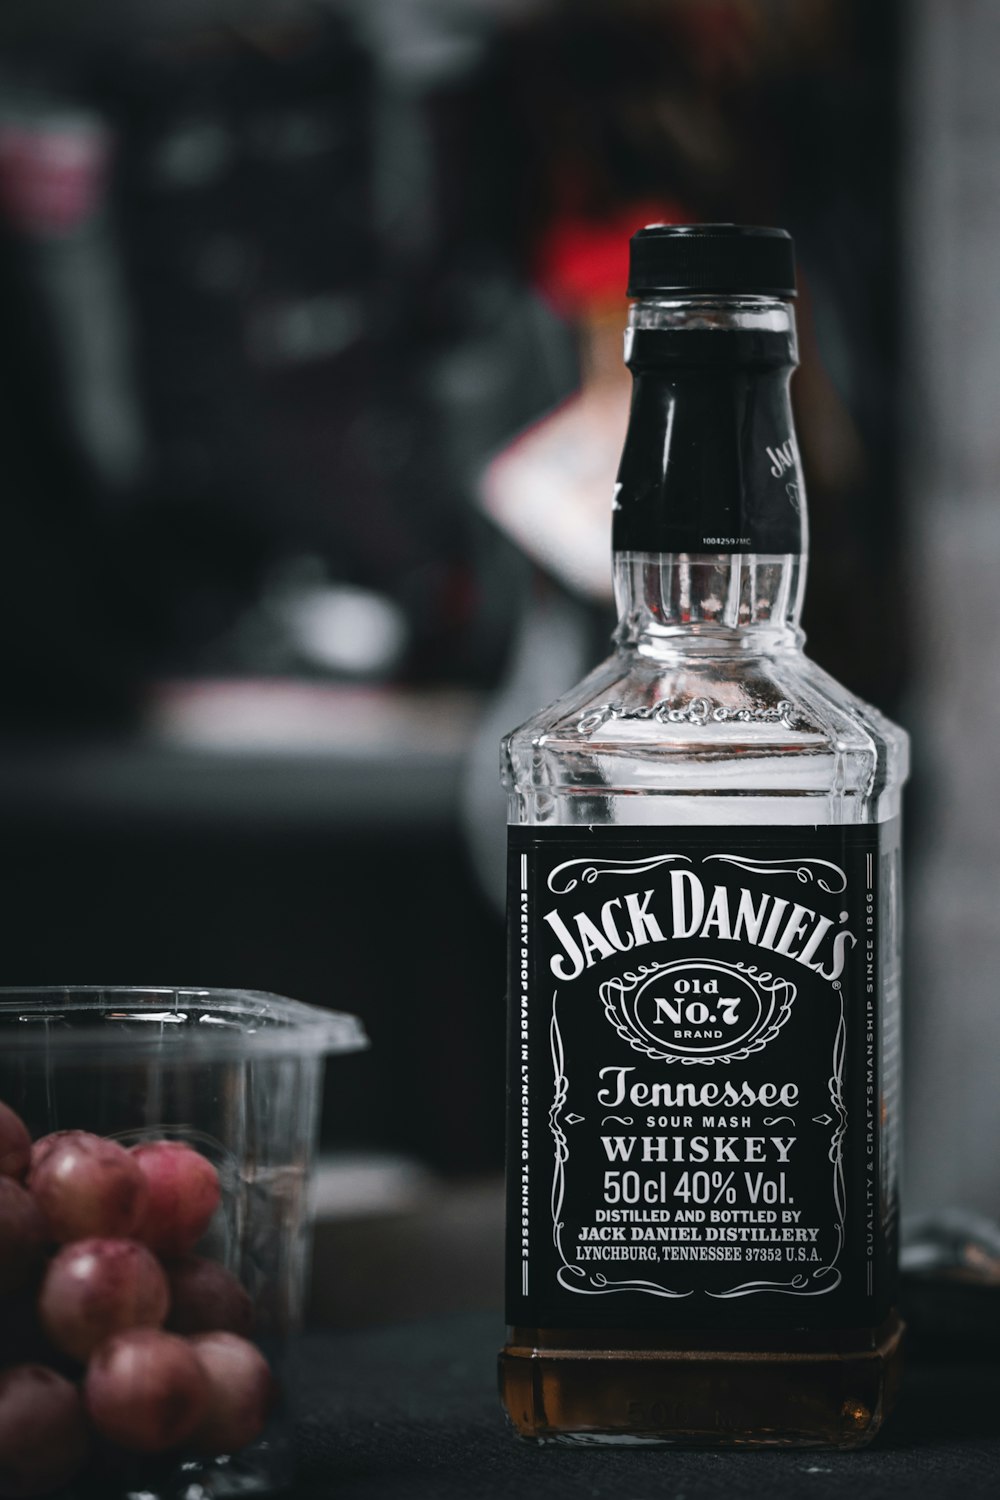 a bottle of jack daniels whiskey next to some grapes